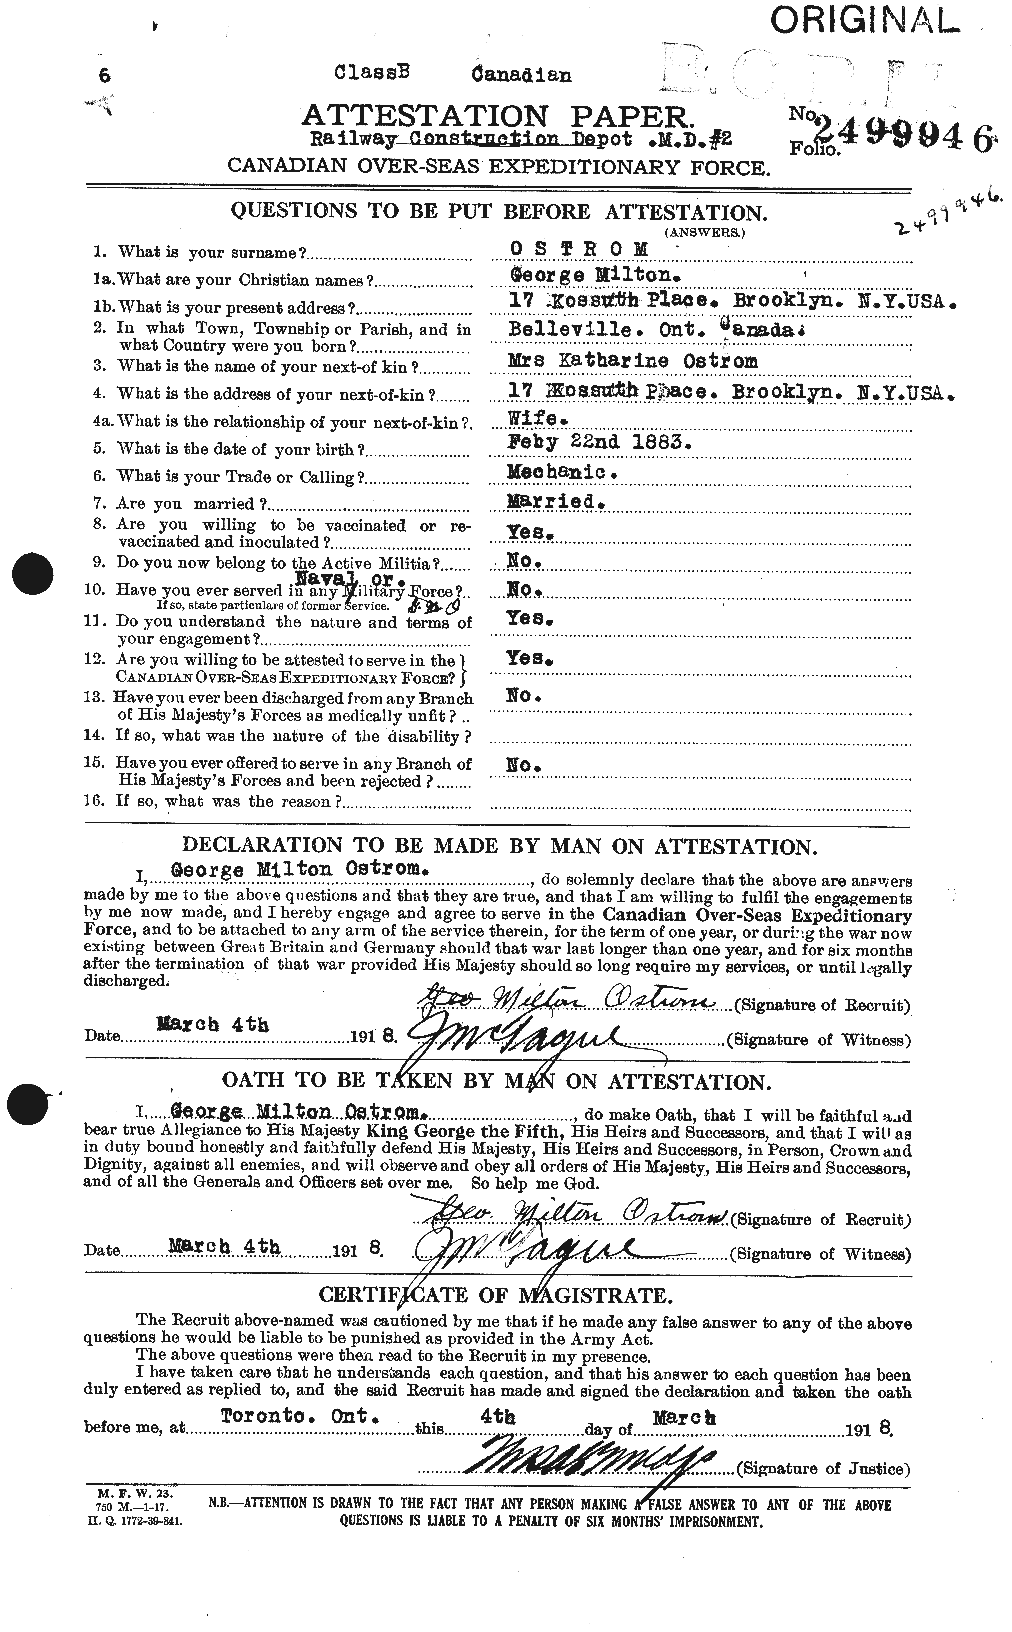 Personnel Records of the First World War - CEF 560270a